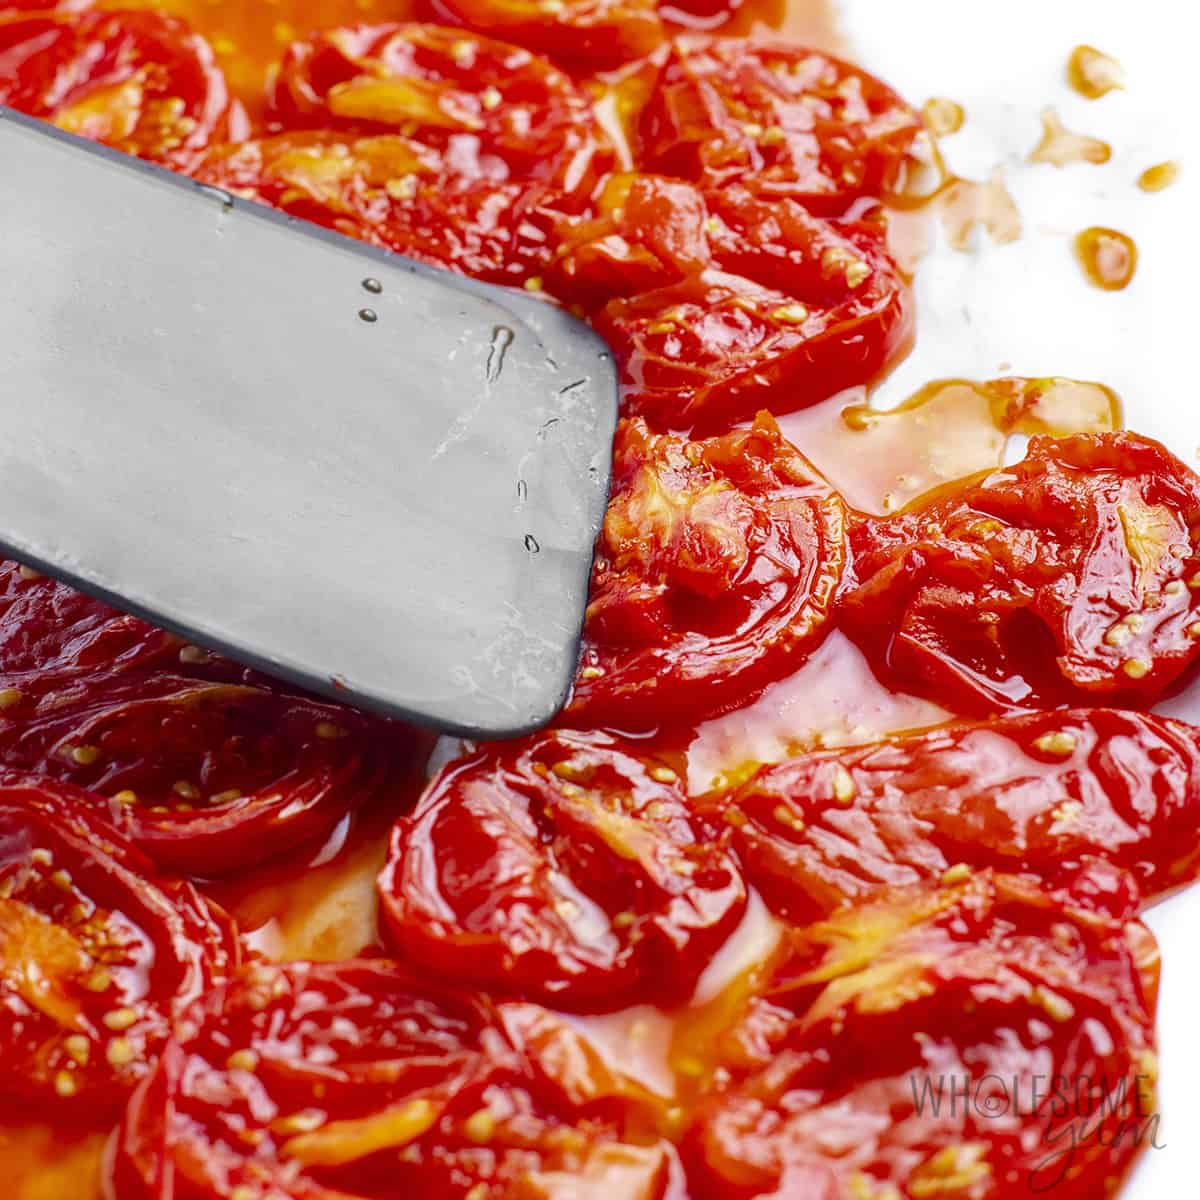 Spatula pressing down on tomatoes in baking sheet.